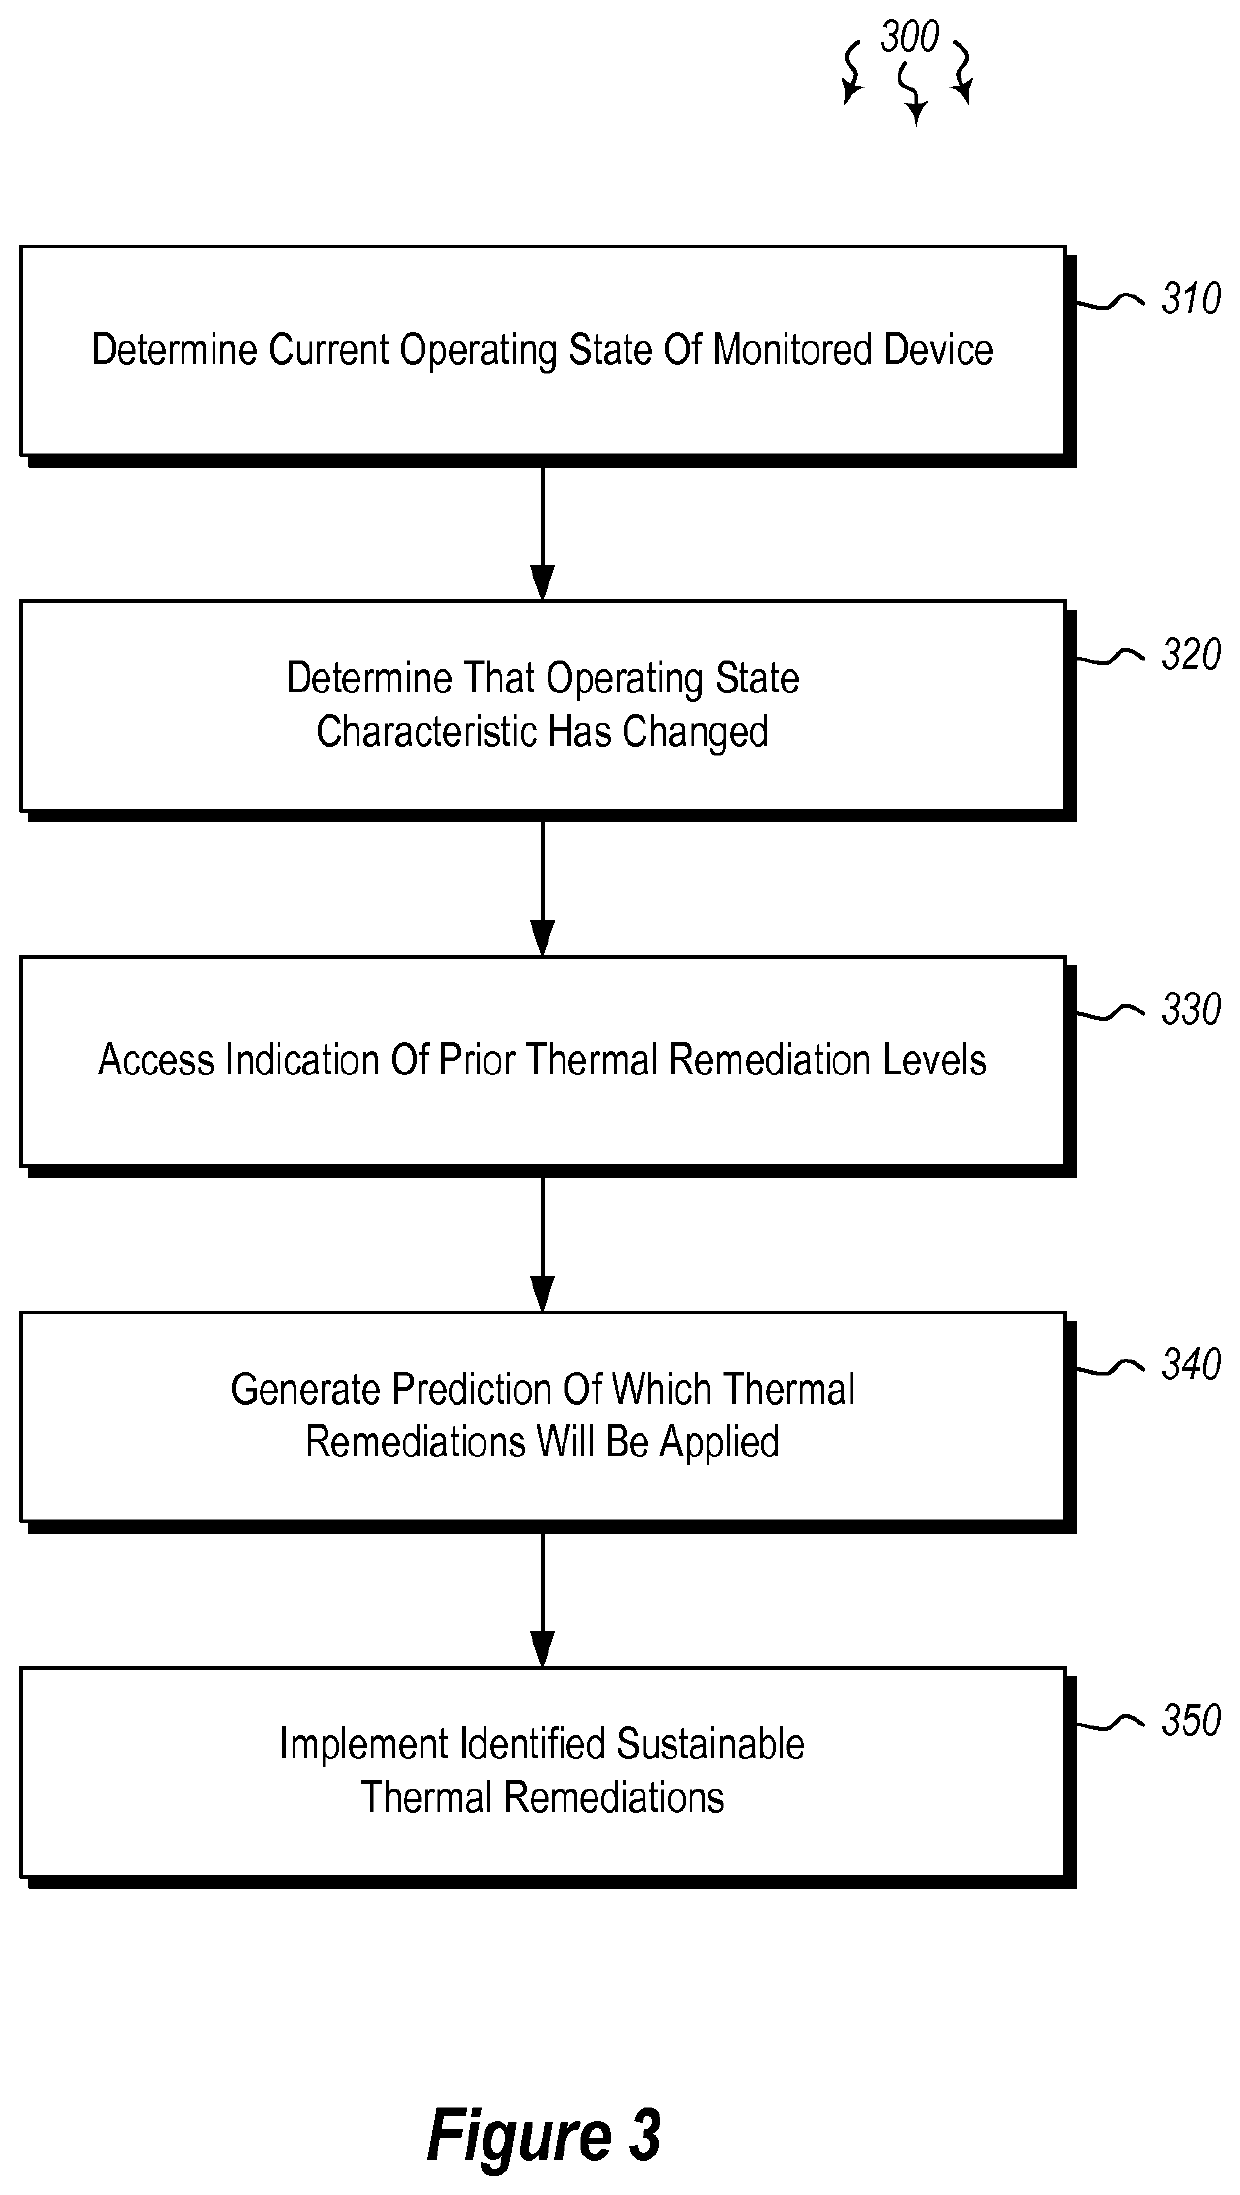 Implementing thermal remediations in reaction to execution of software